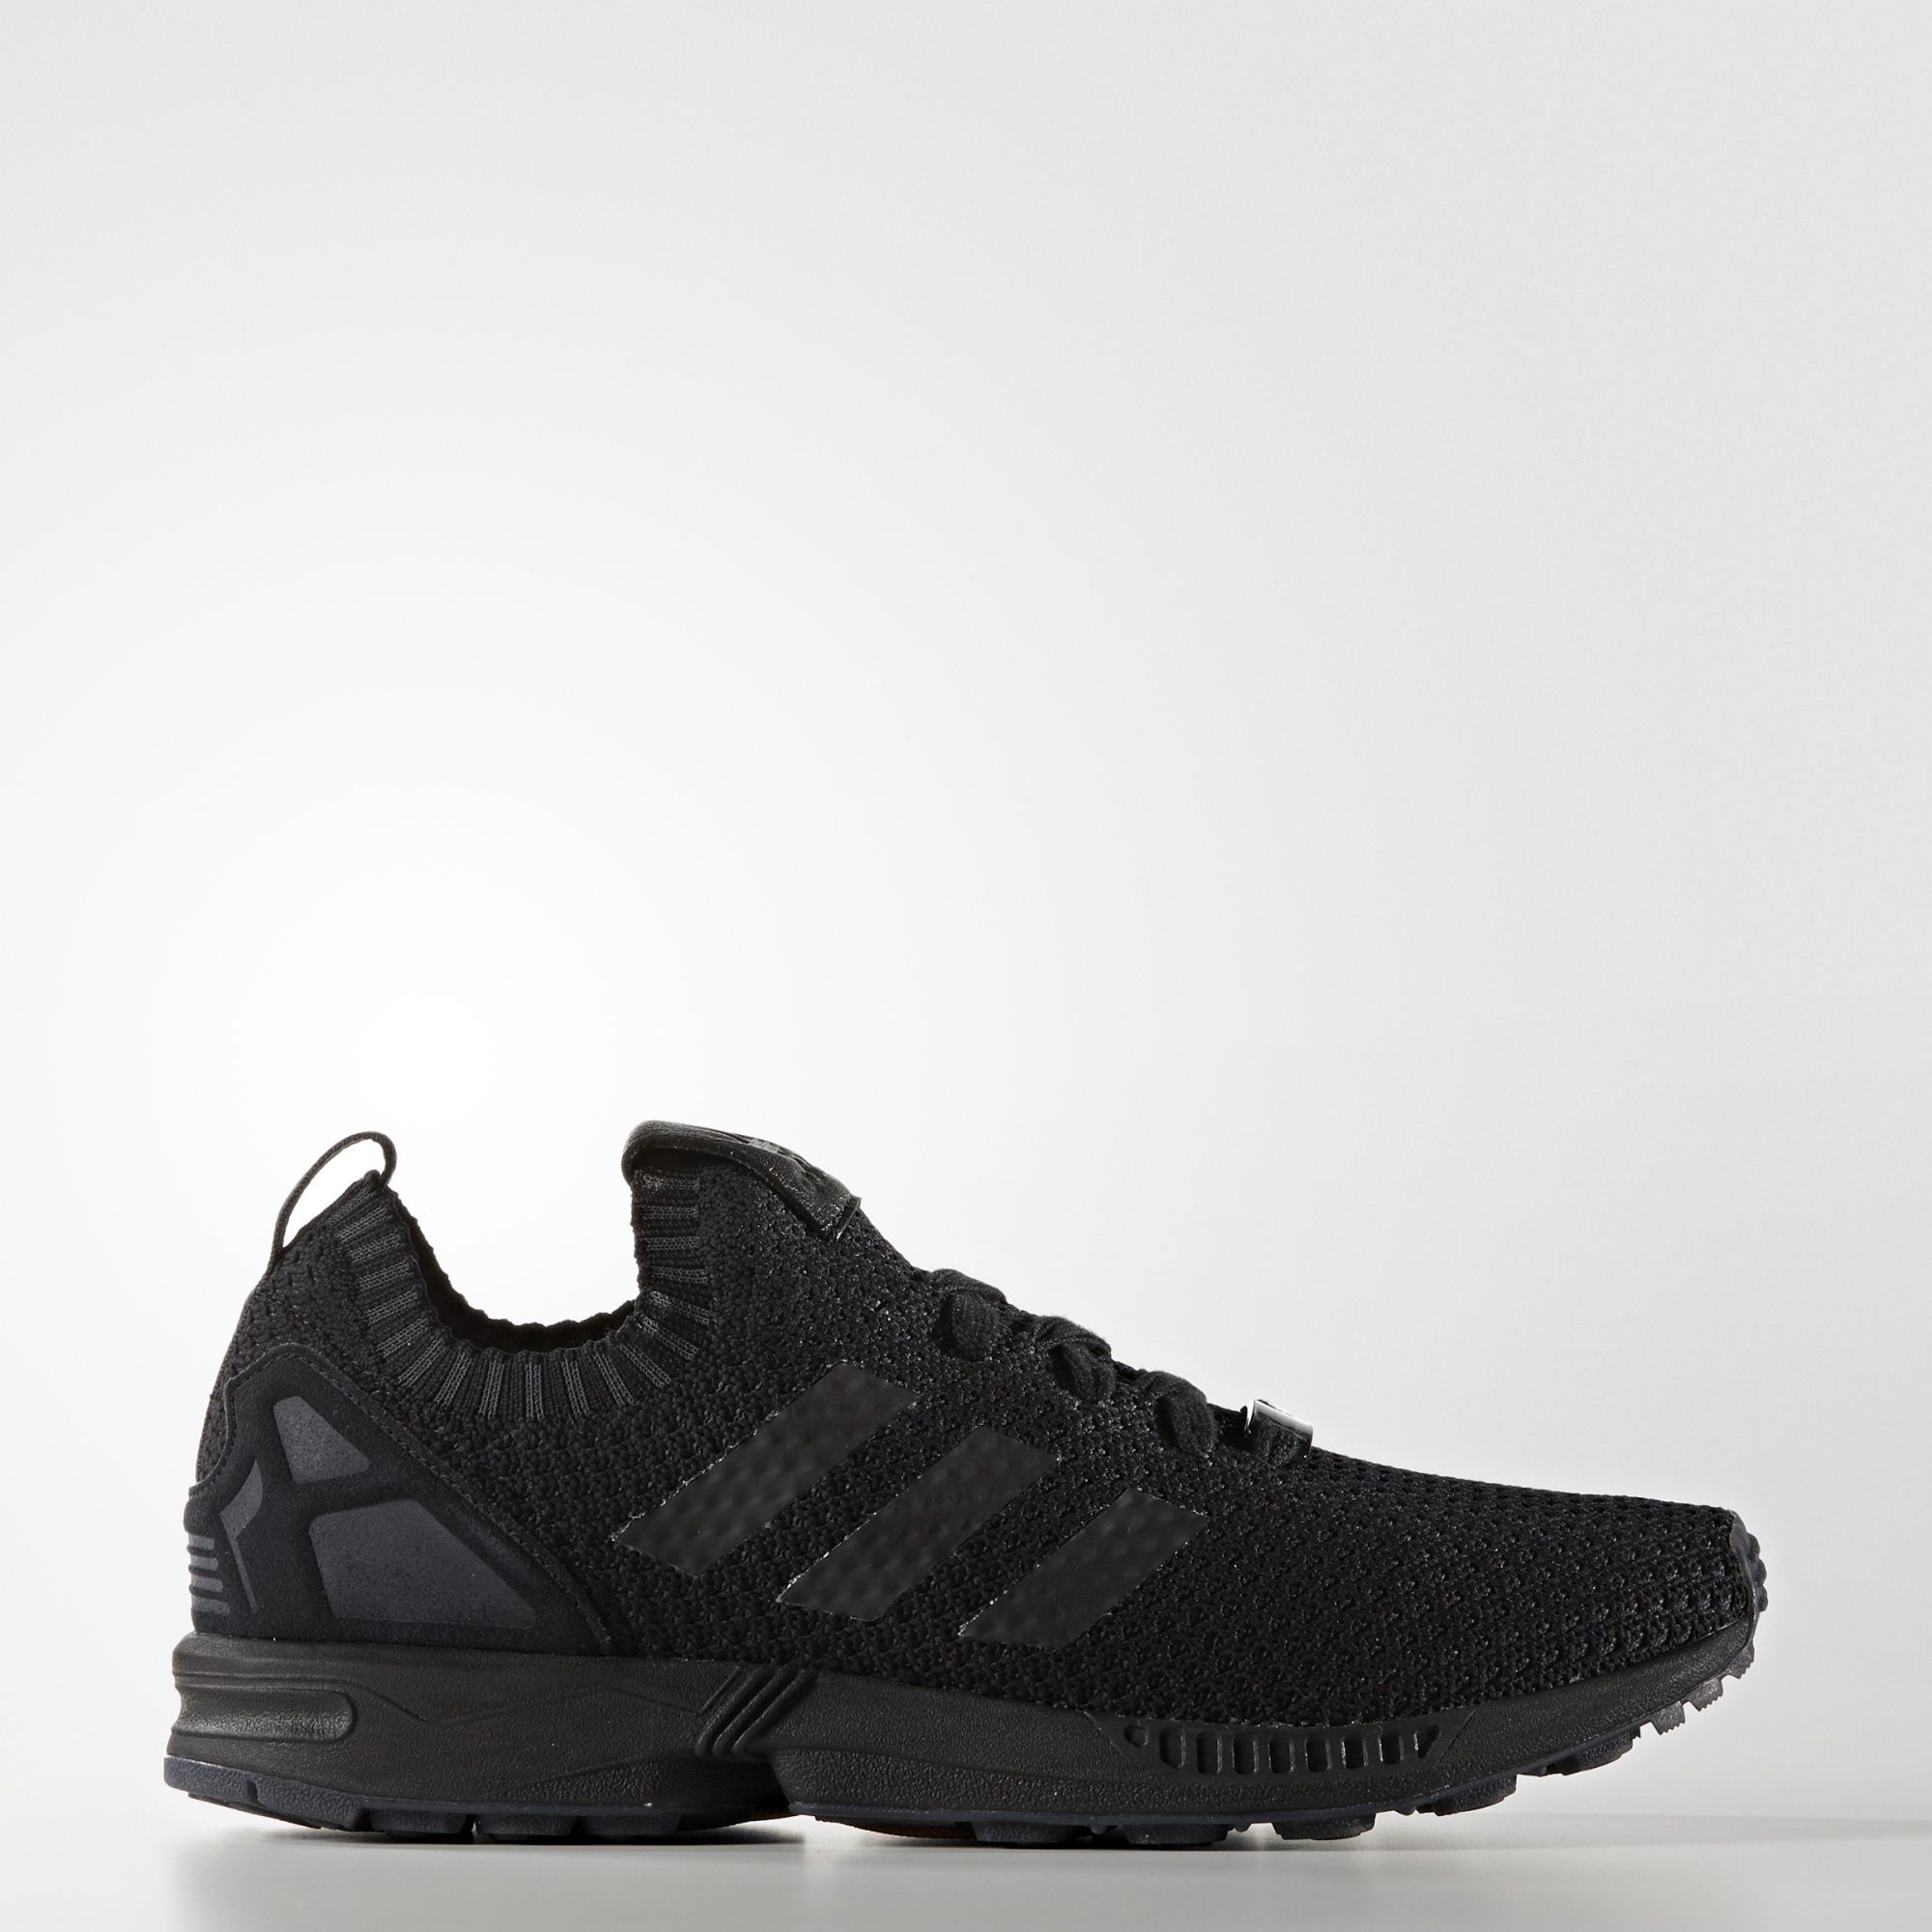 The adidas ZX Flux Gets a Primeknit Makeover-1